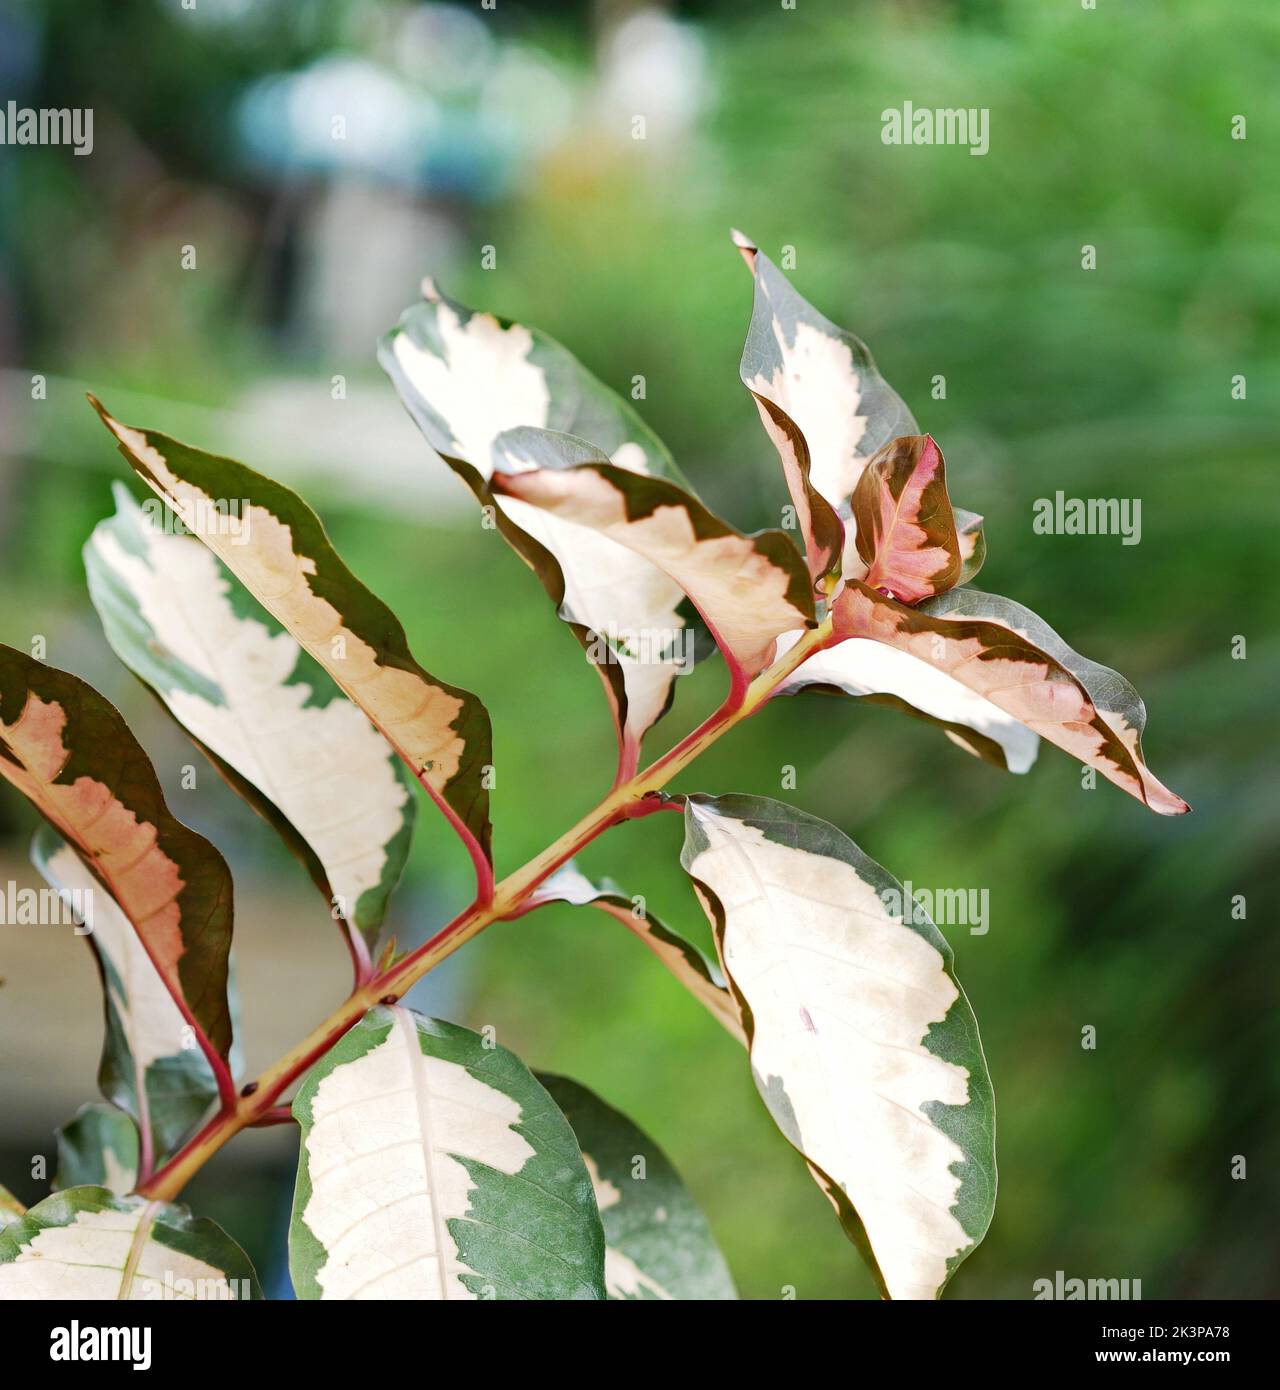 A closeup of euonymus japonicus plant growing on a blurry green background Stock Photo